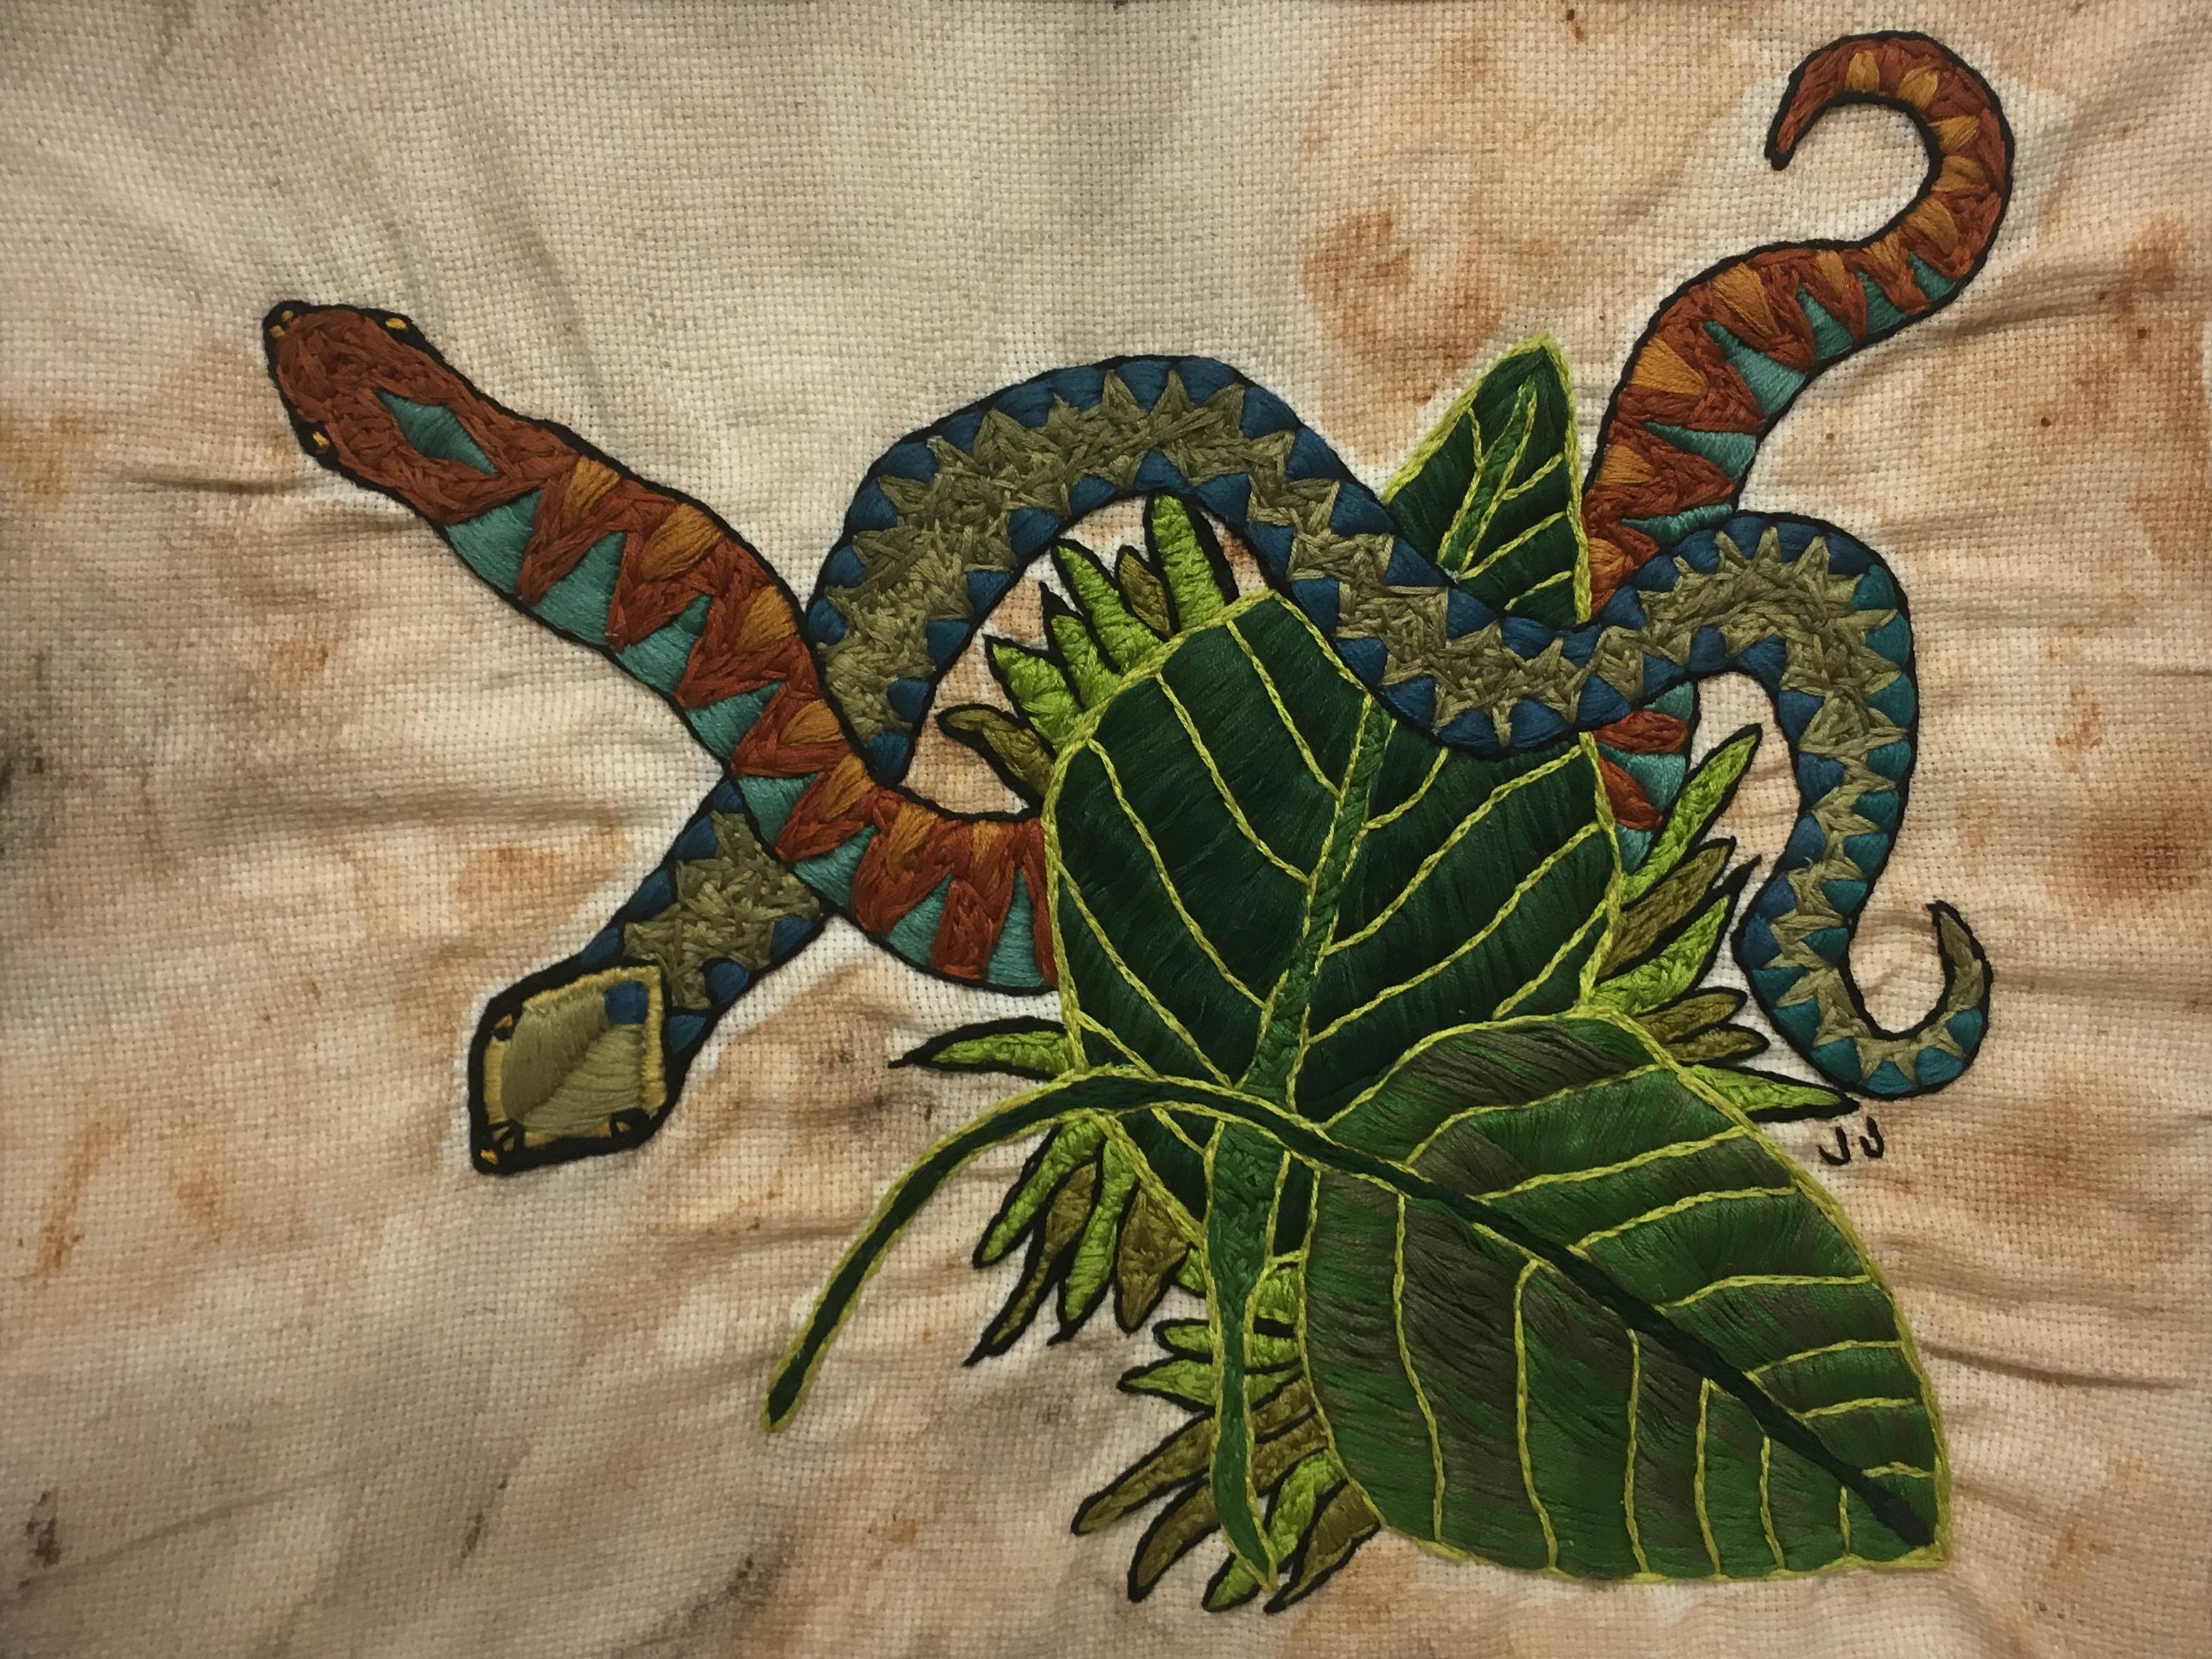 Jacie Jane D'Agostino Animal Painting - Veiled Knots , 2019, embroidery & fabric dye on canvas, snakes, leaf, earth tone